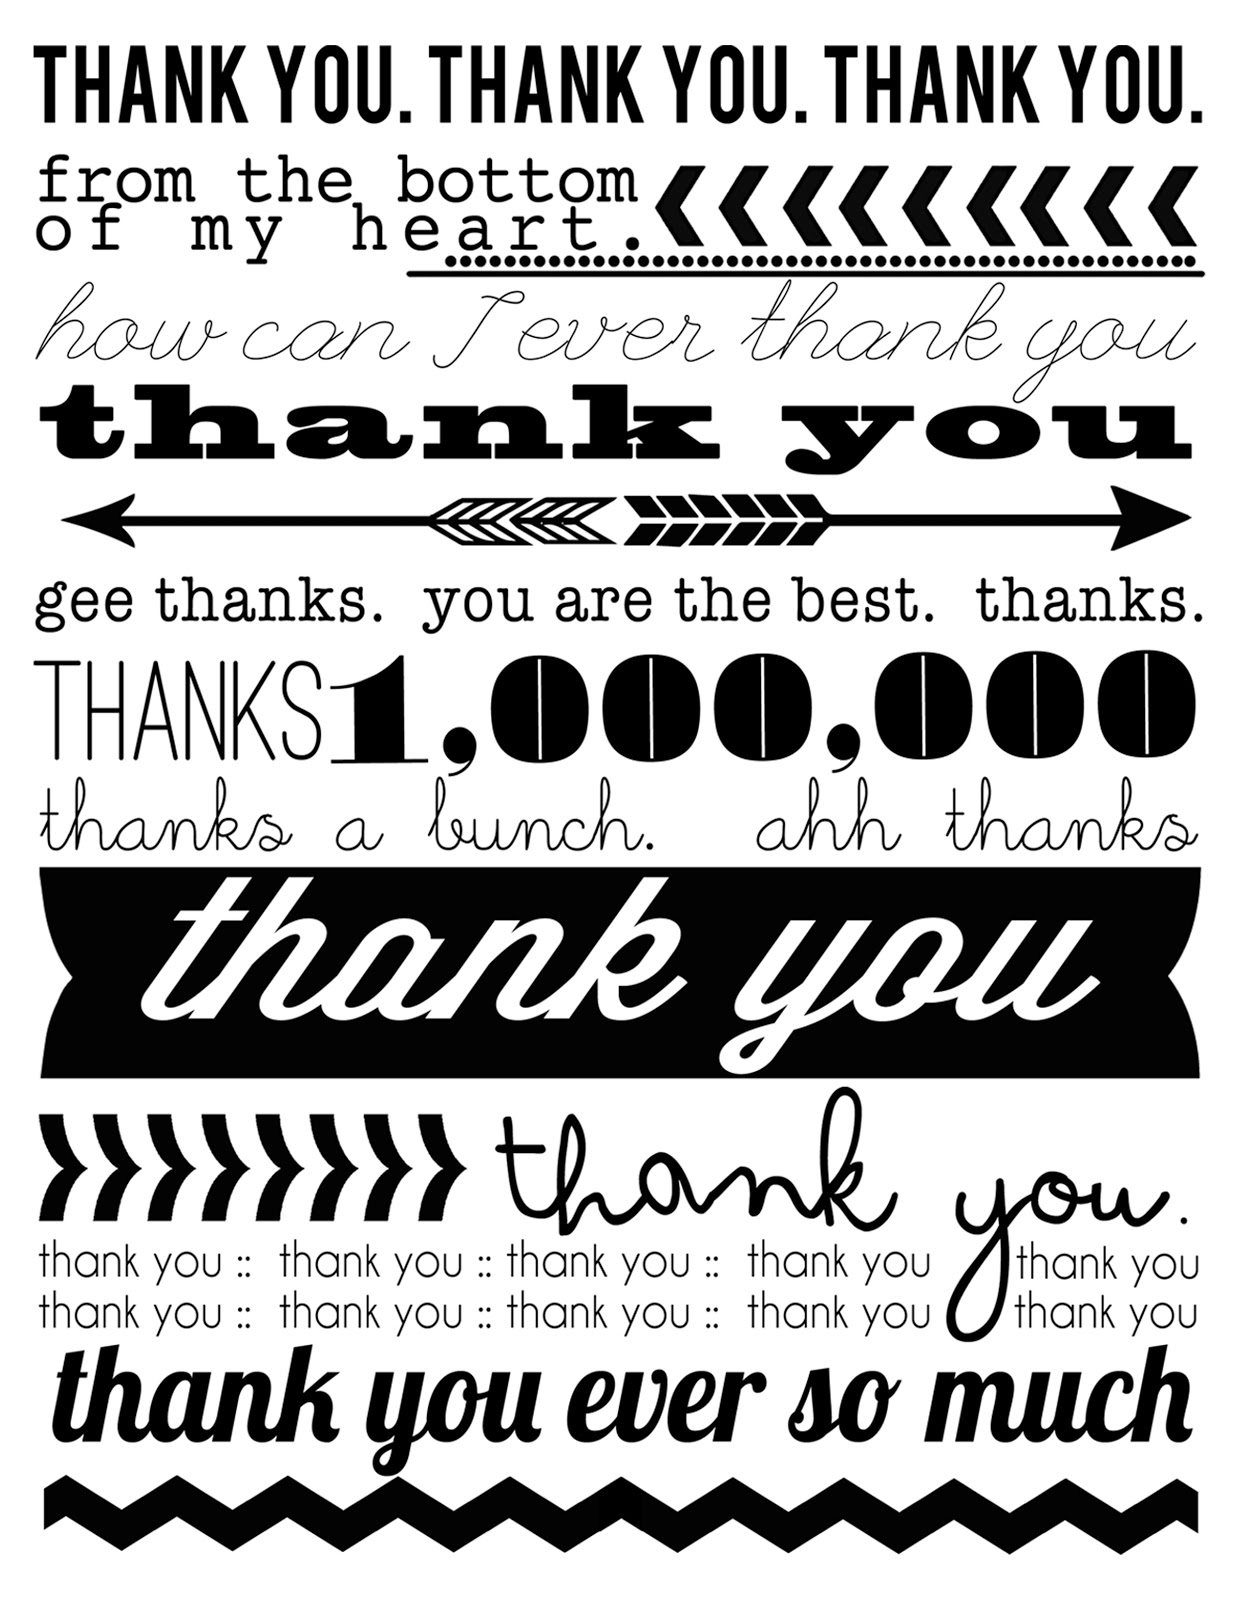 printable-thank-you-cards-black-and-white-printable-cards